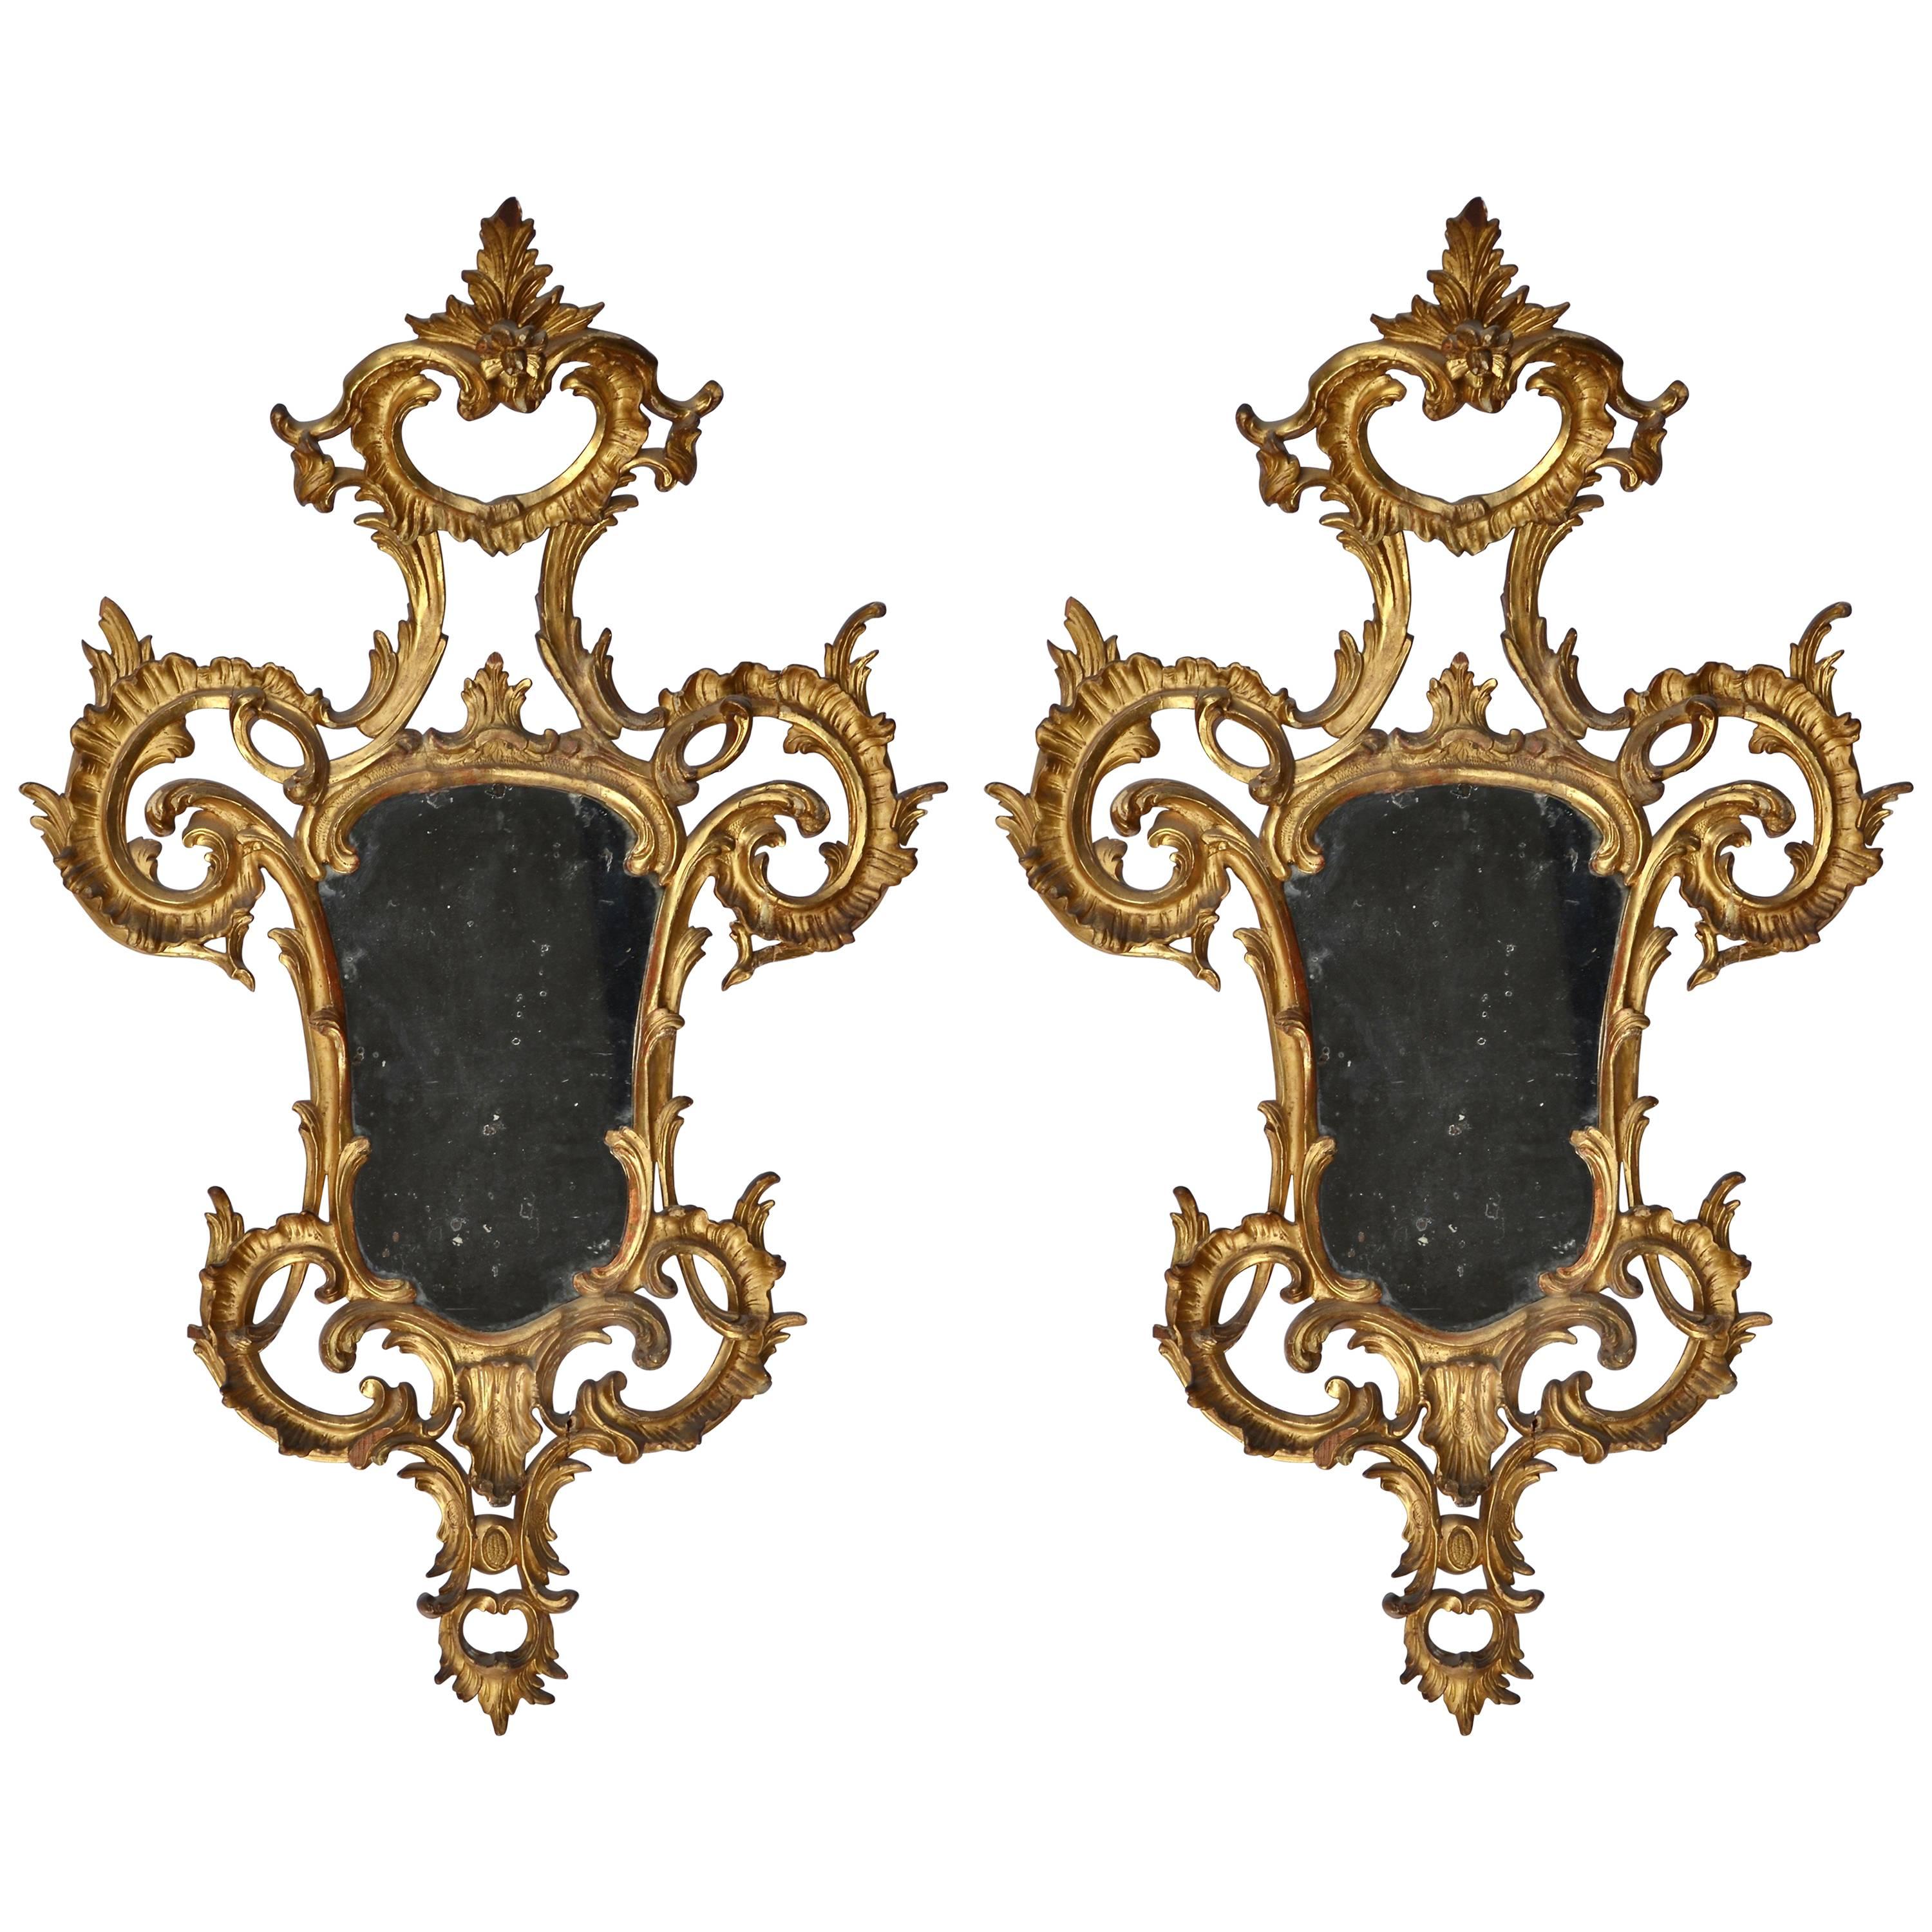 Beautiful Pair of 18th Century Italian Rococo Carved Giltwood Mirrors